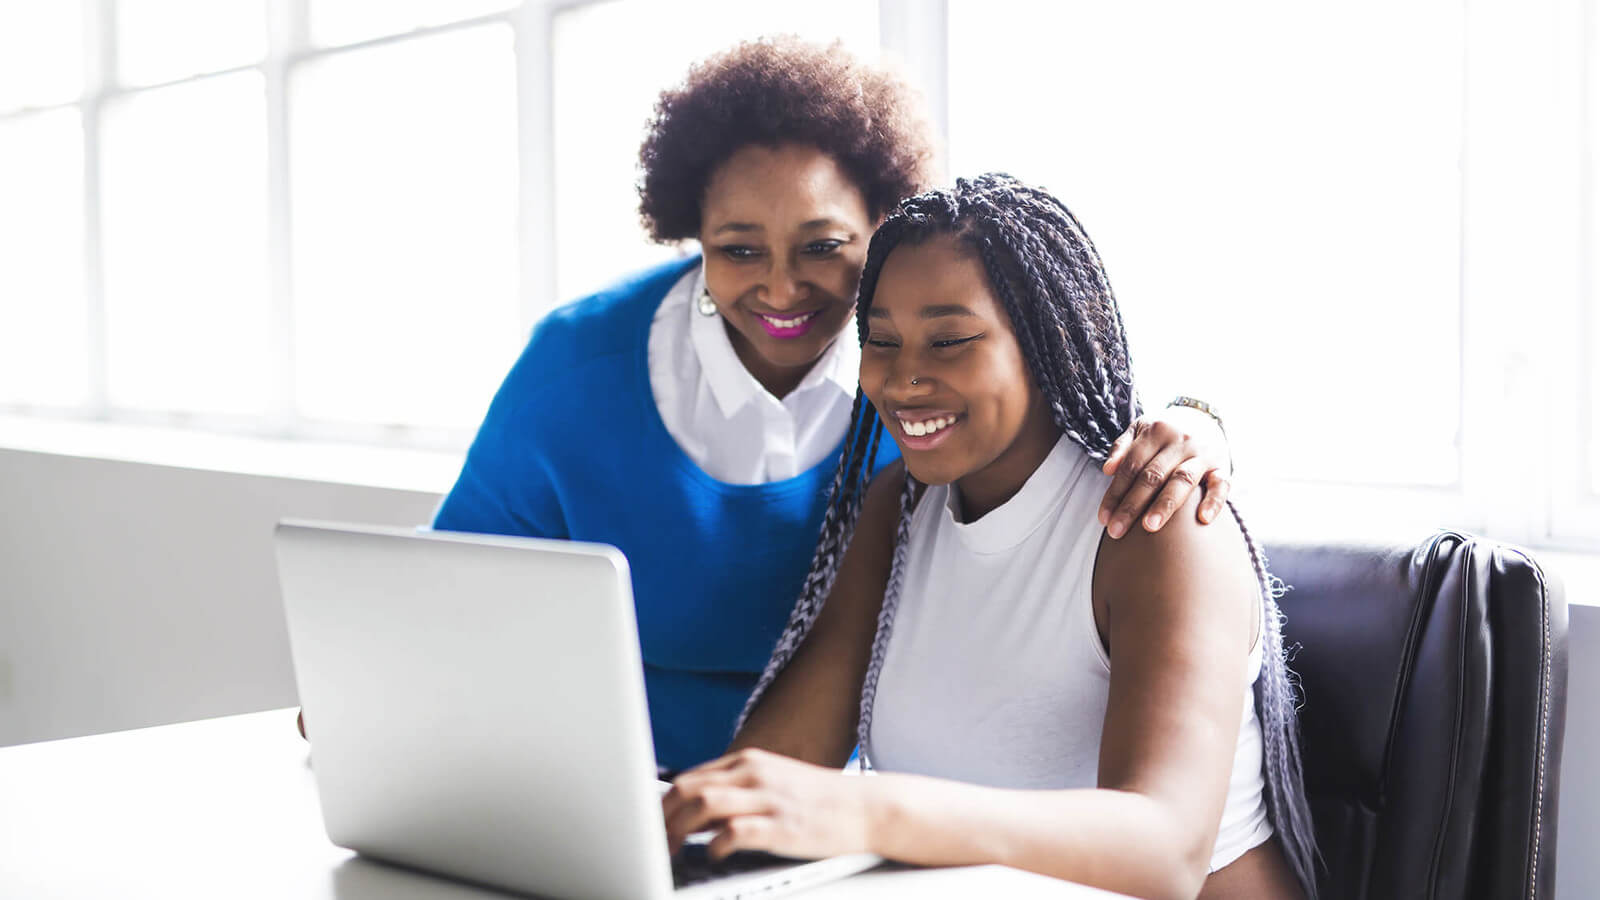 a mother and daughter look at a laptop and financial aid application